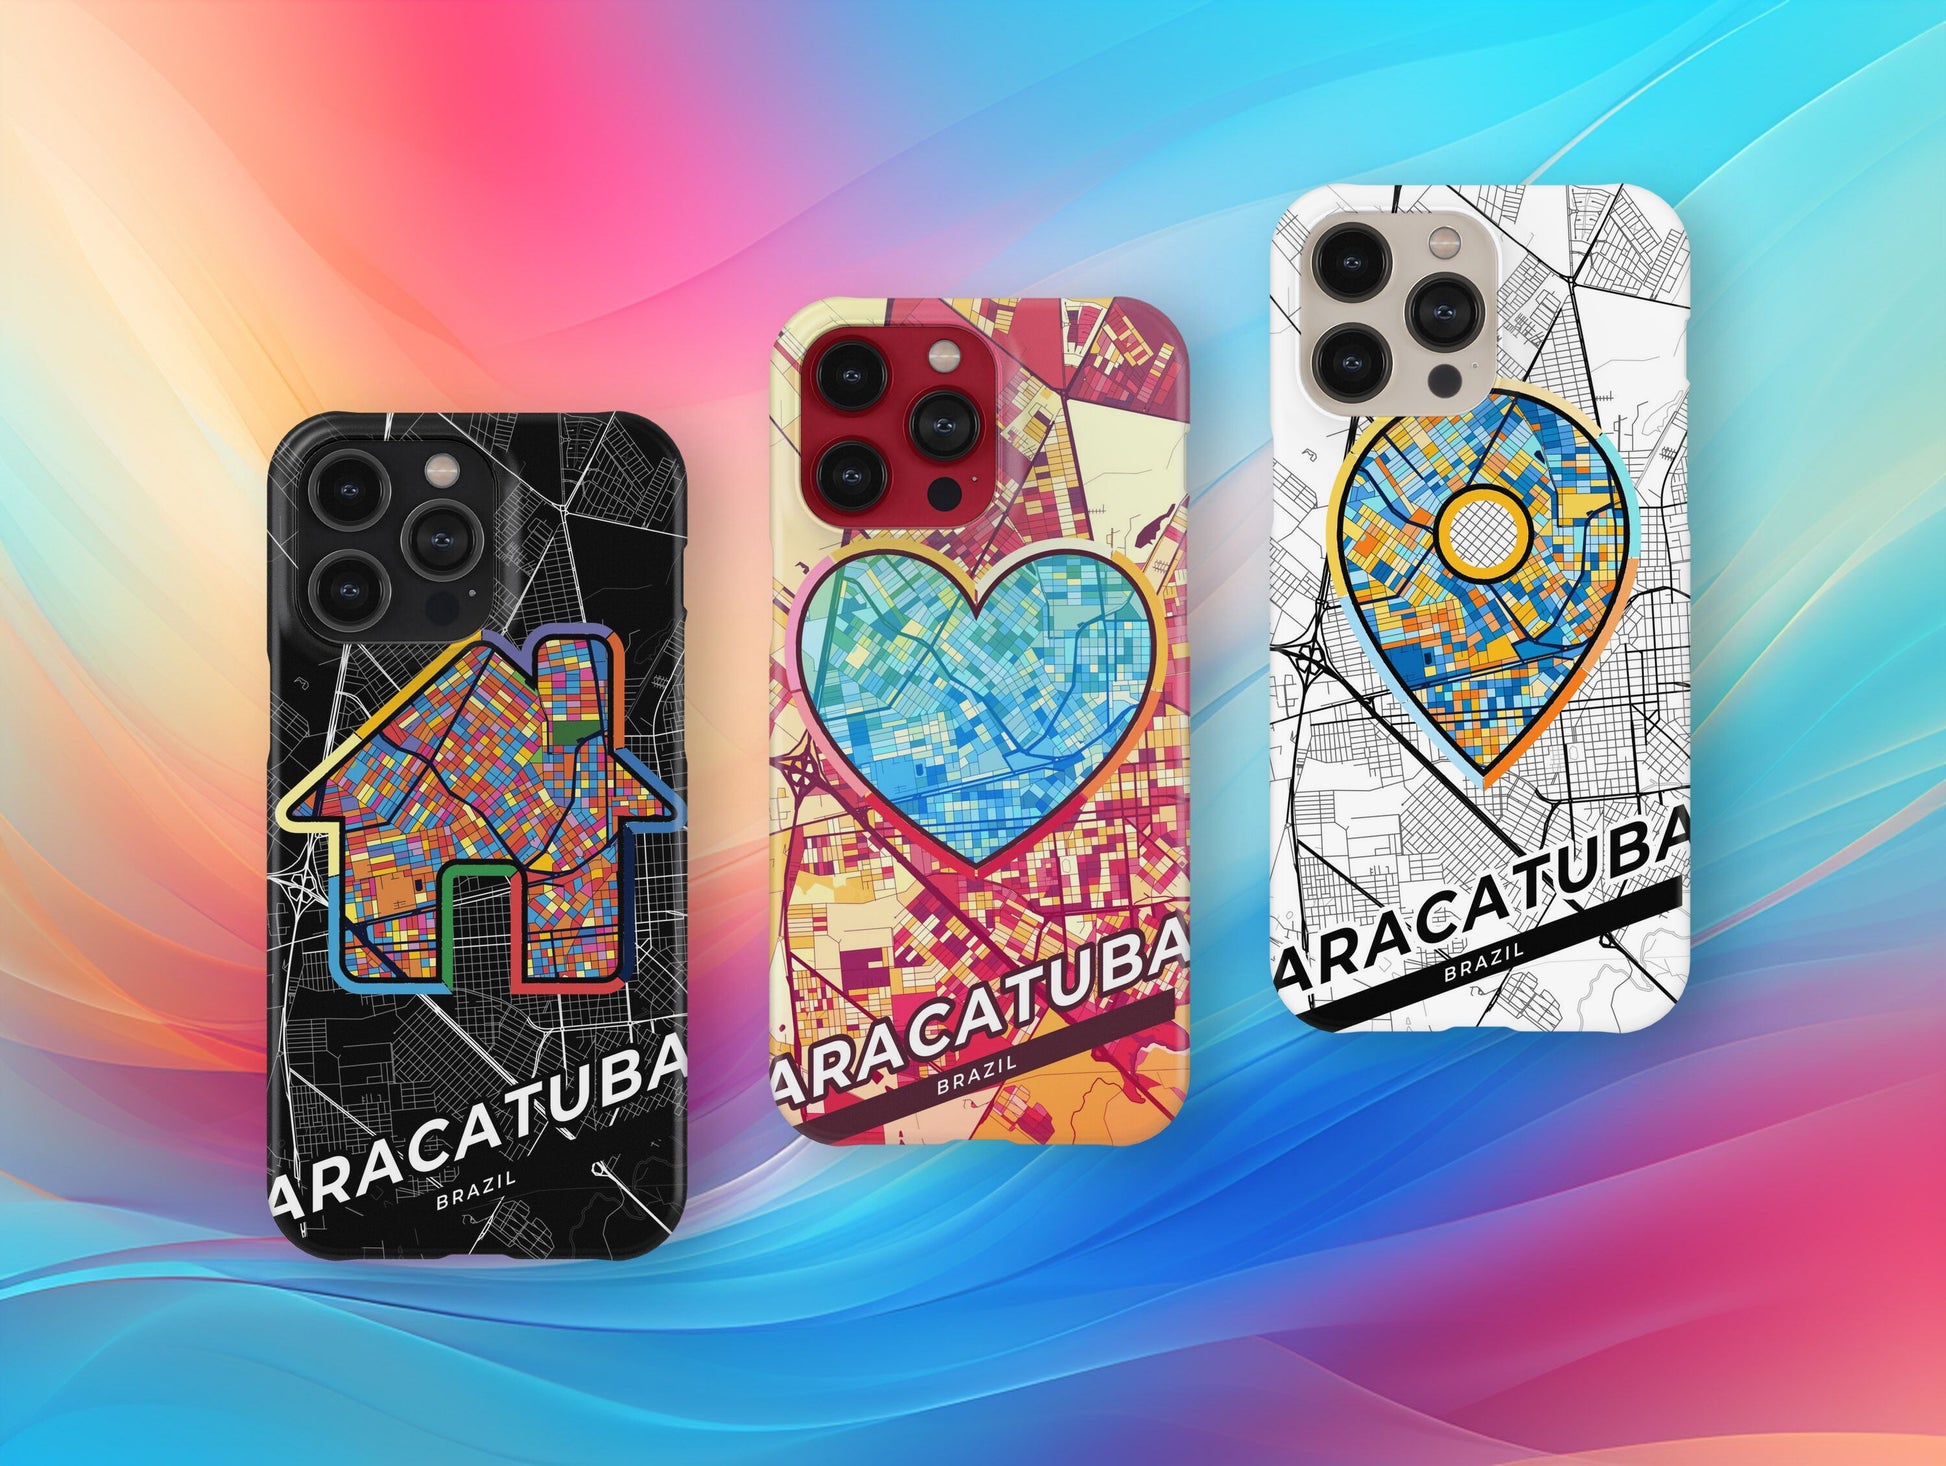 Aracatuba Brazil slim phone case with colorful icon. Birthday, wedding or housewarming gift. Couple match cases.